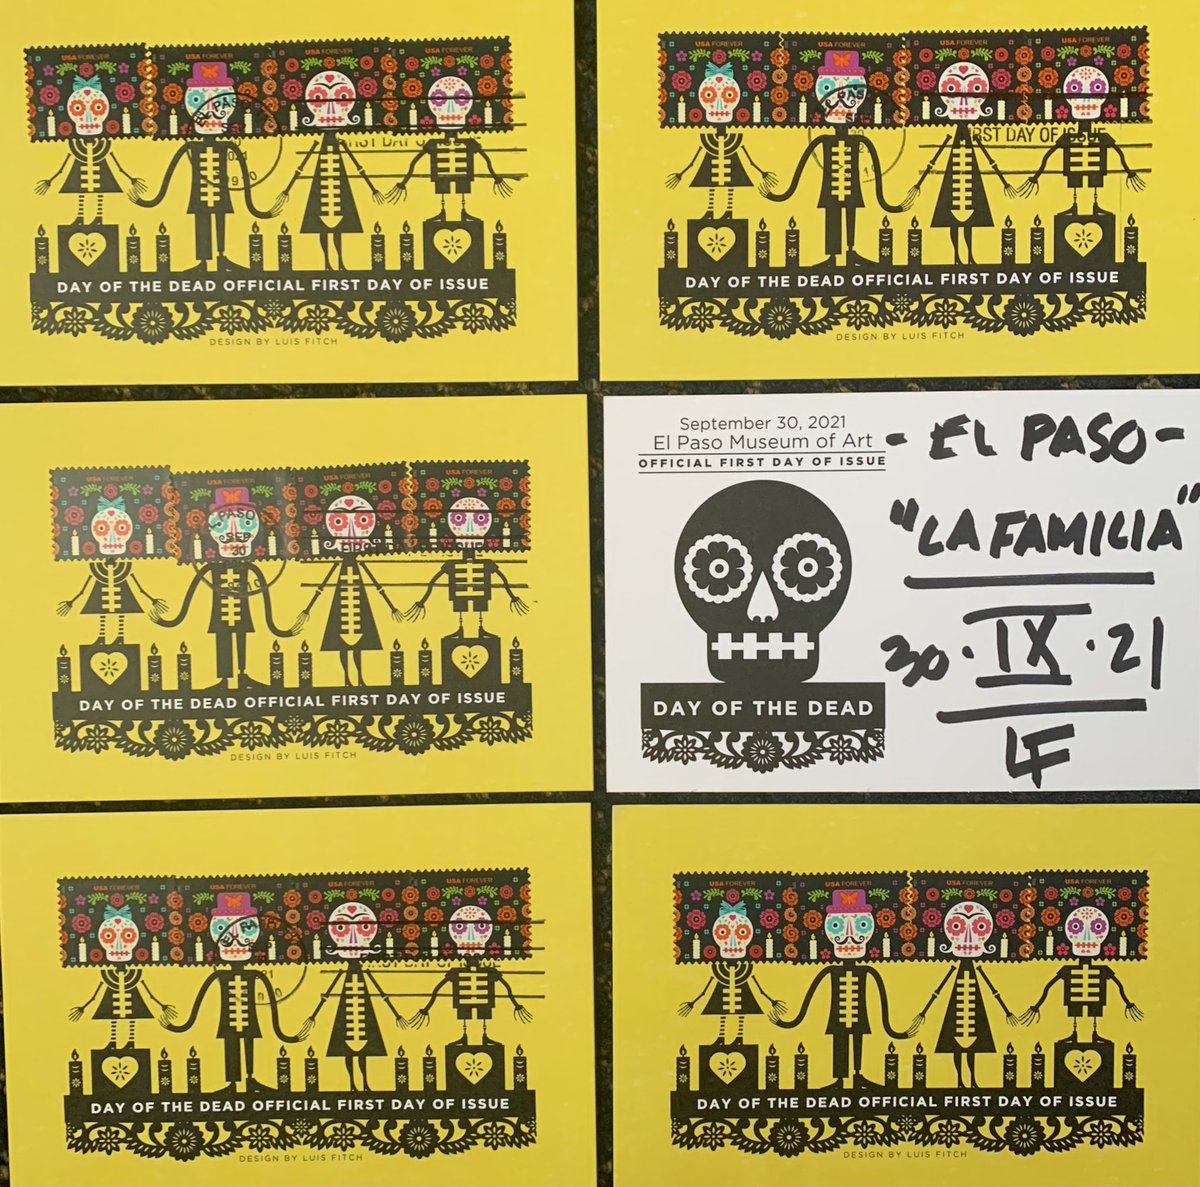 La Familia. Day of the Dead official first day of issue. #dayofthedeadstamps #ElPasoStrong #luisfitch